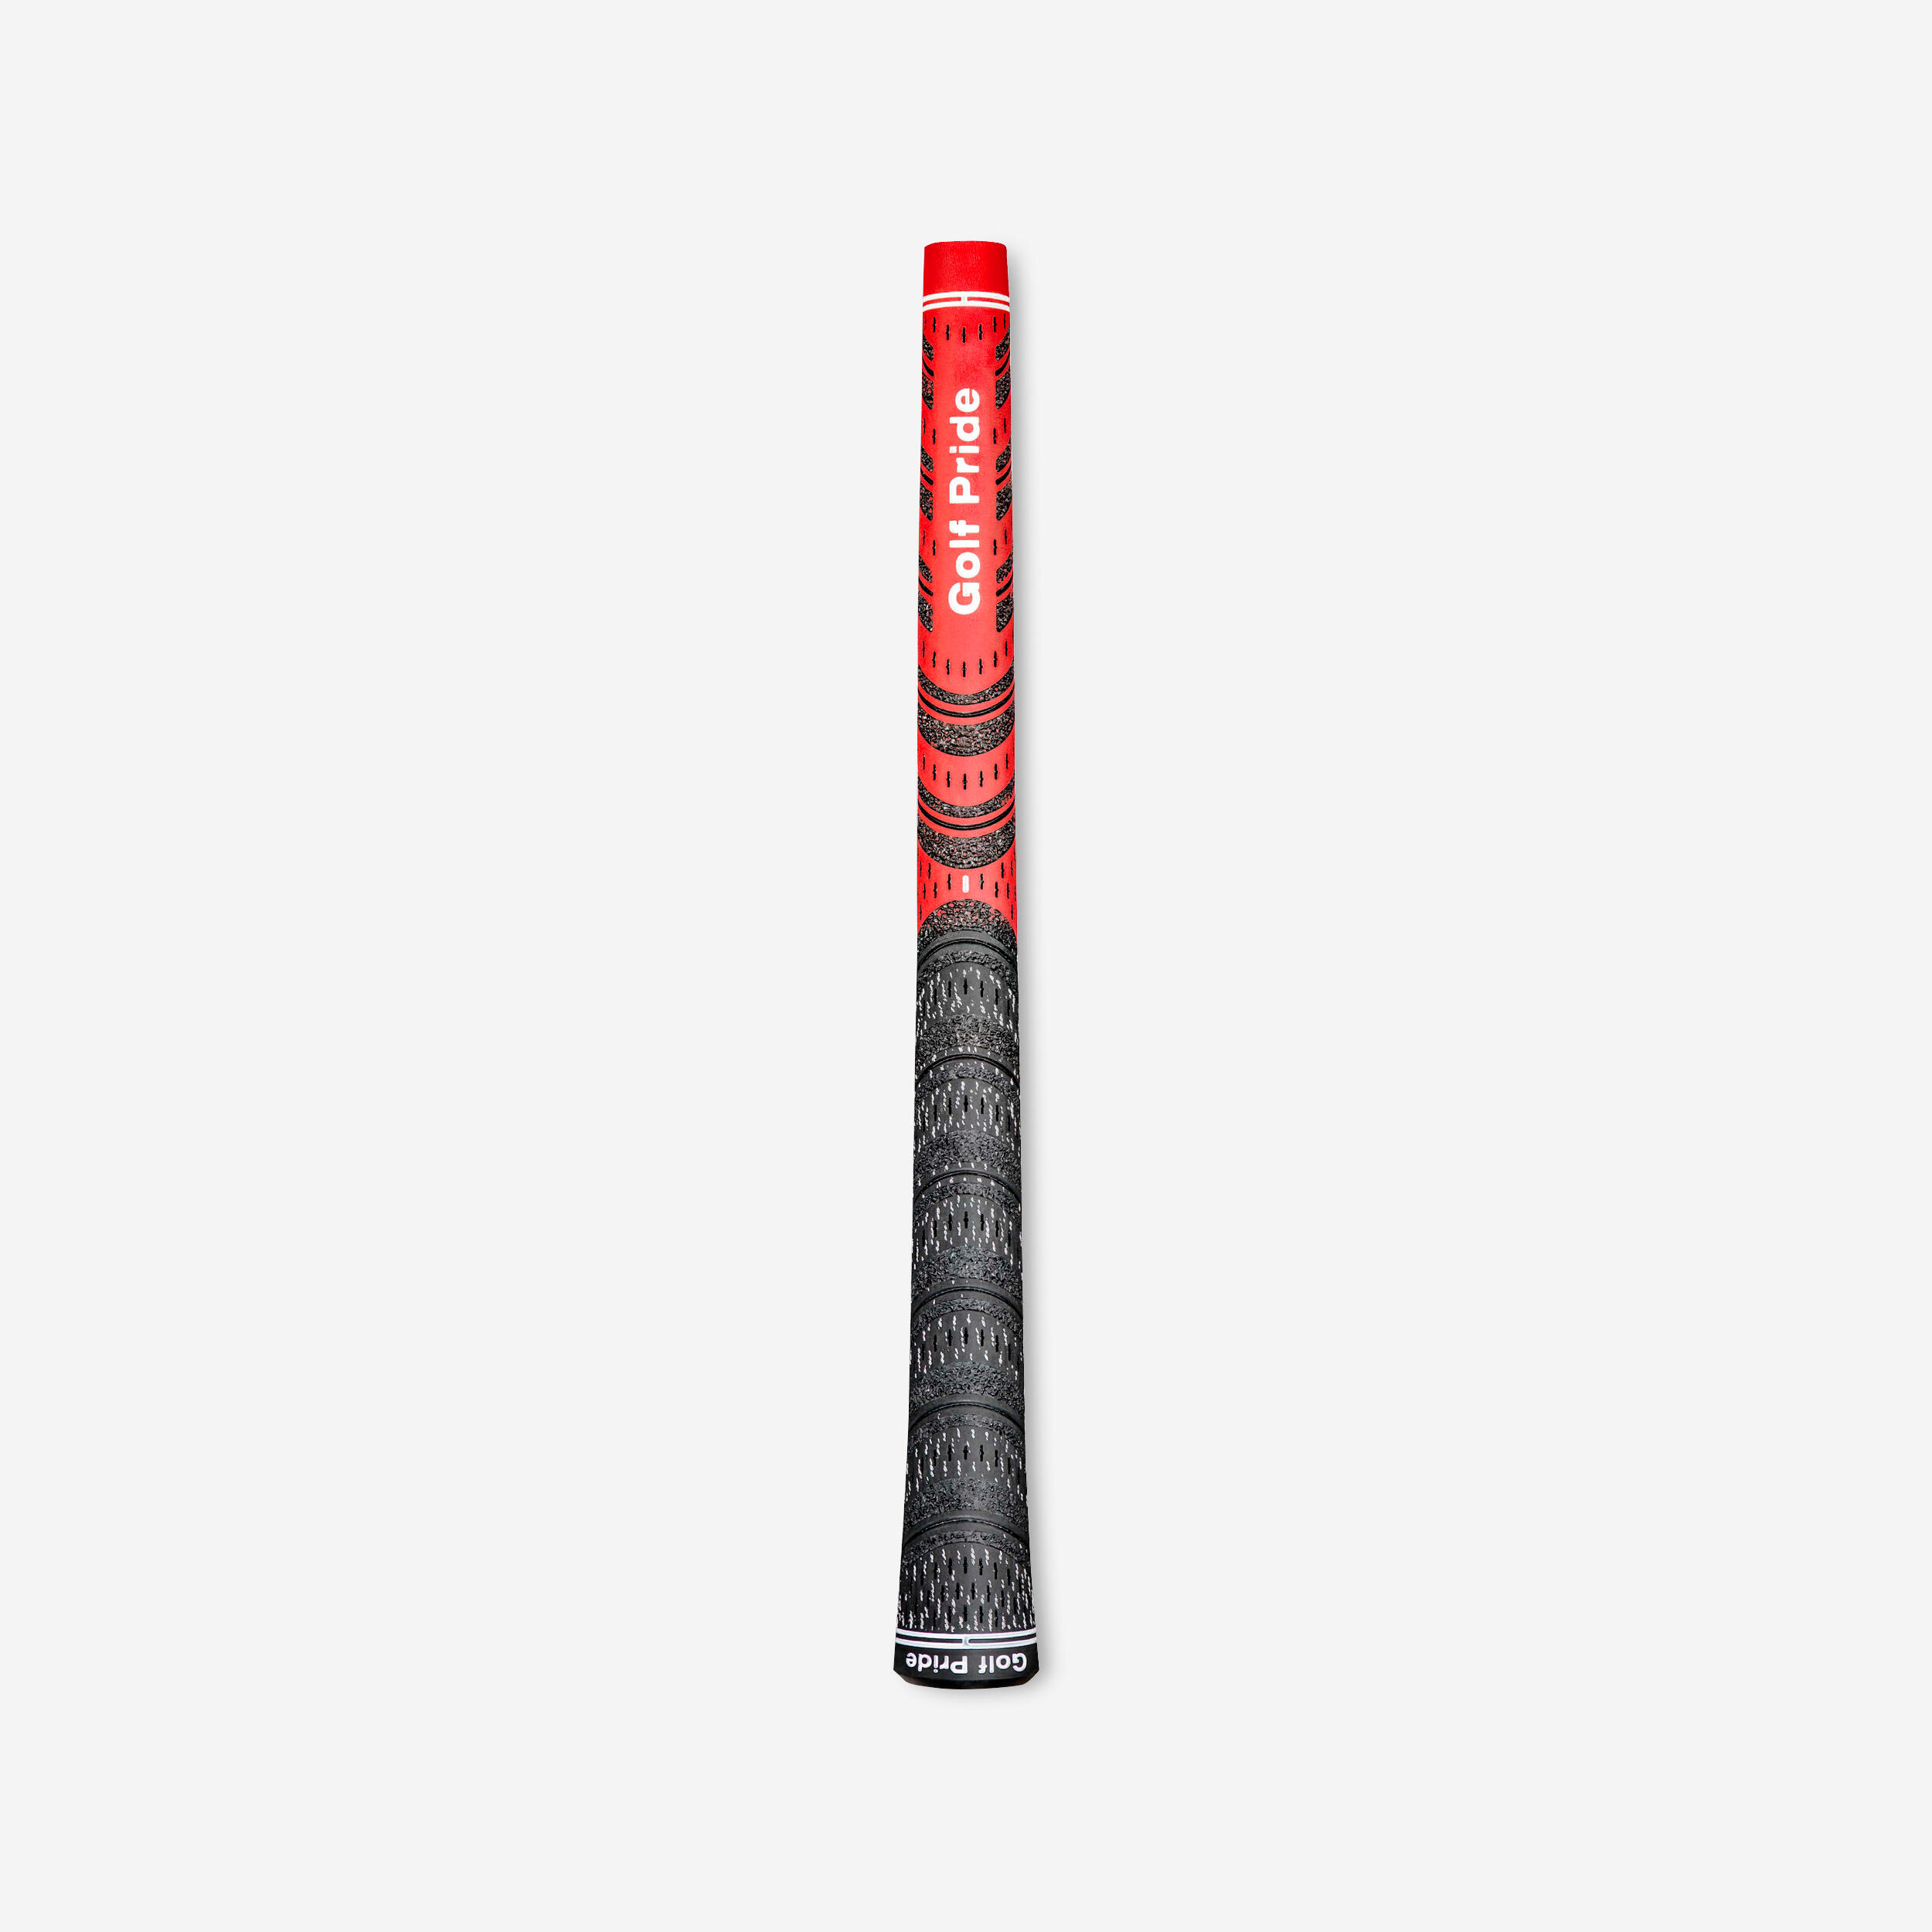 GOLFPRIDE GOLF GRIP 1/2 CORD - NEW DECAD RED